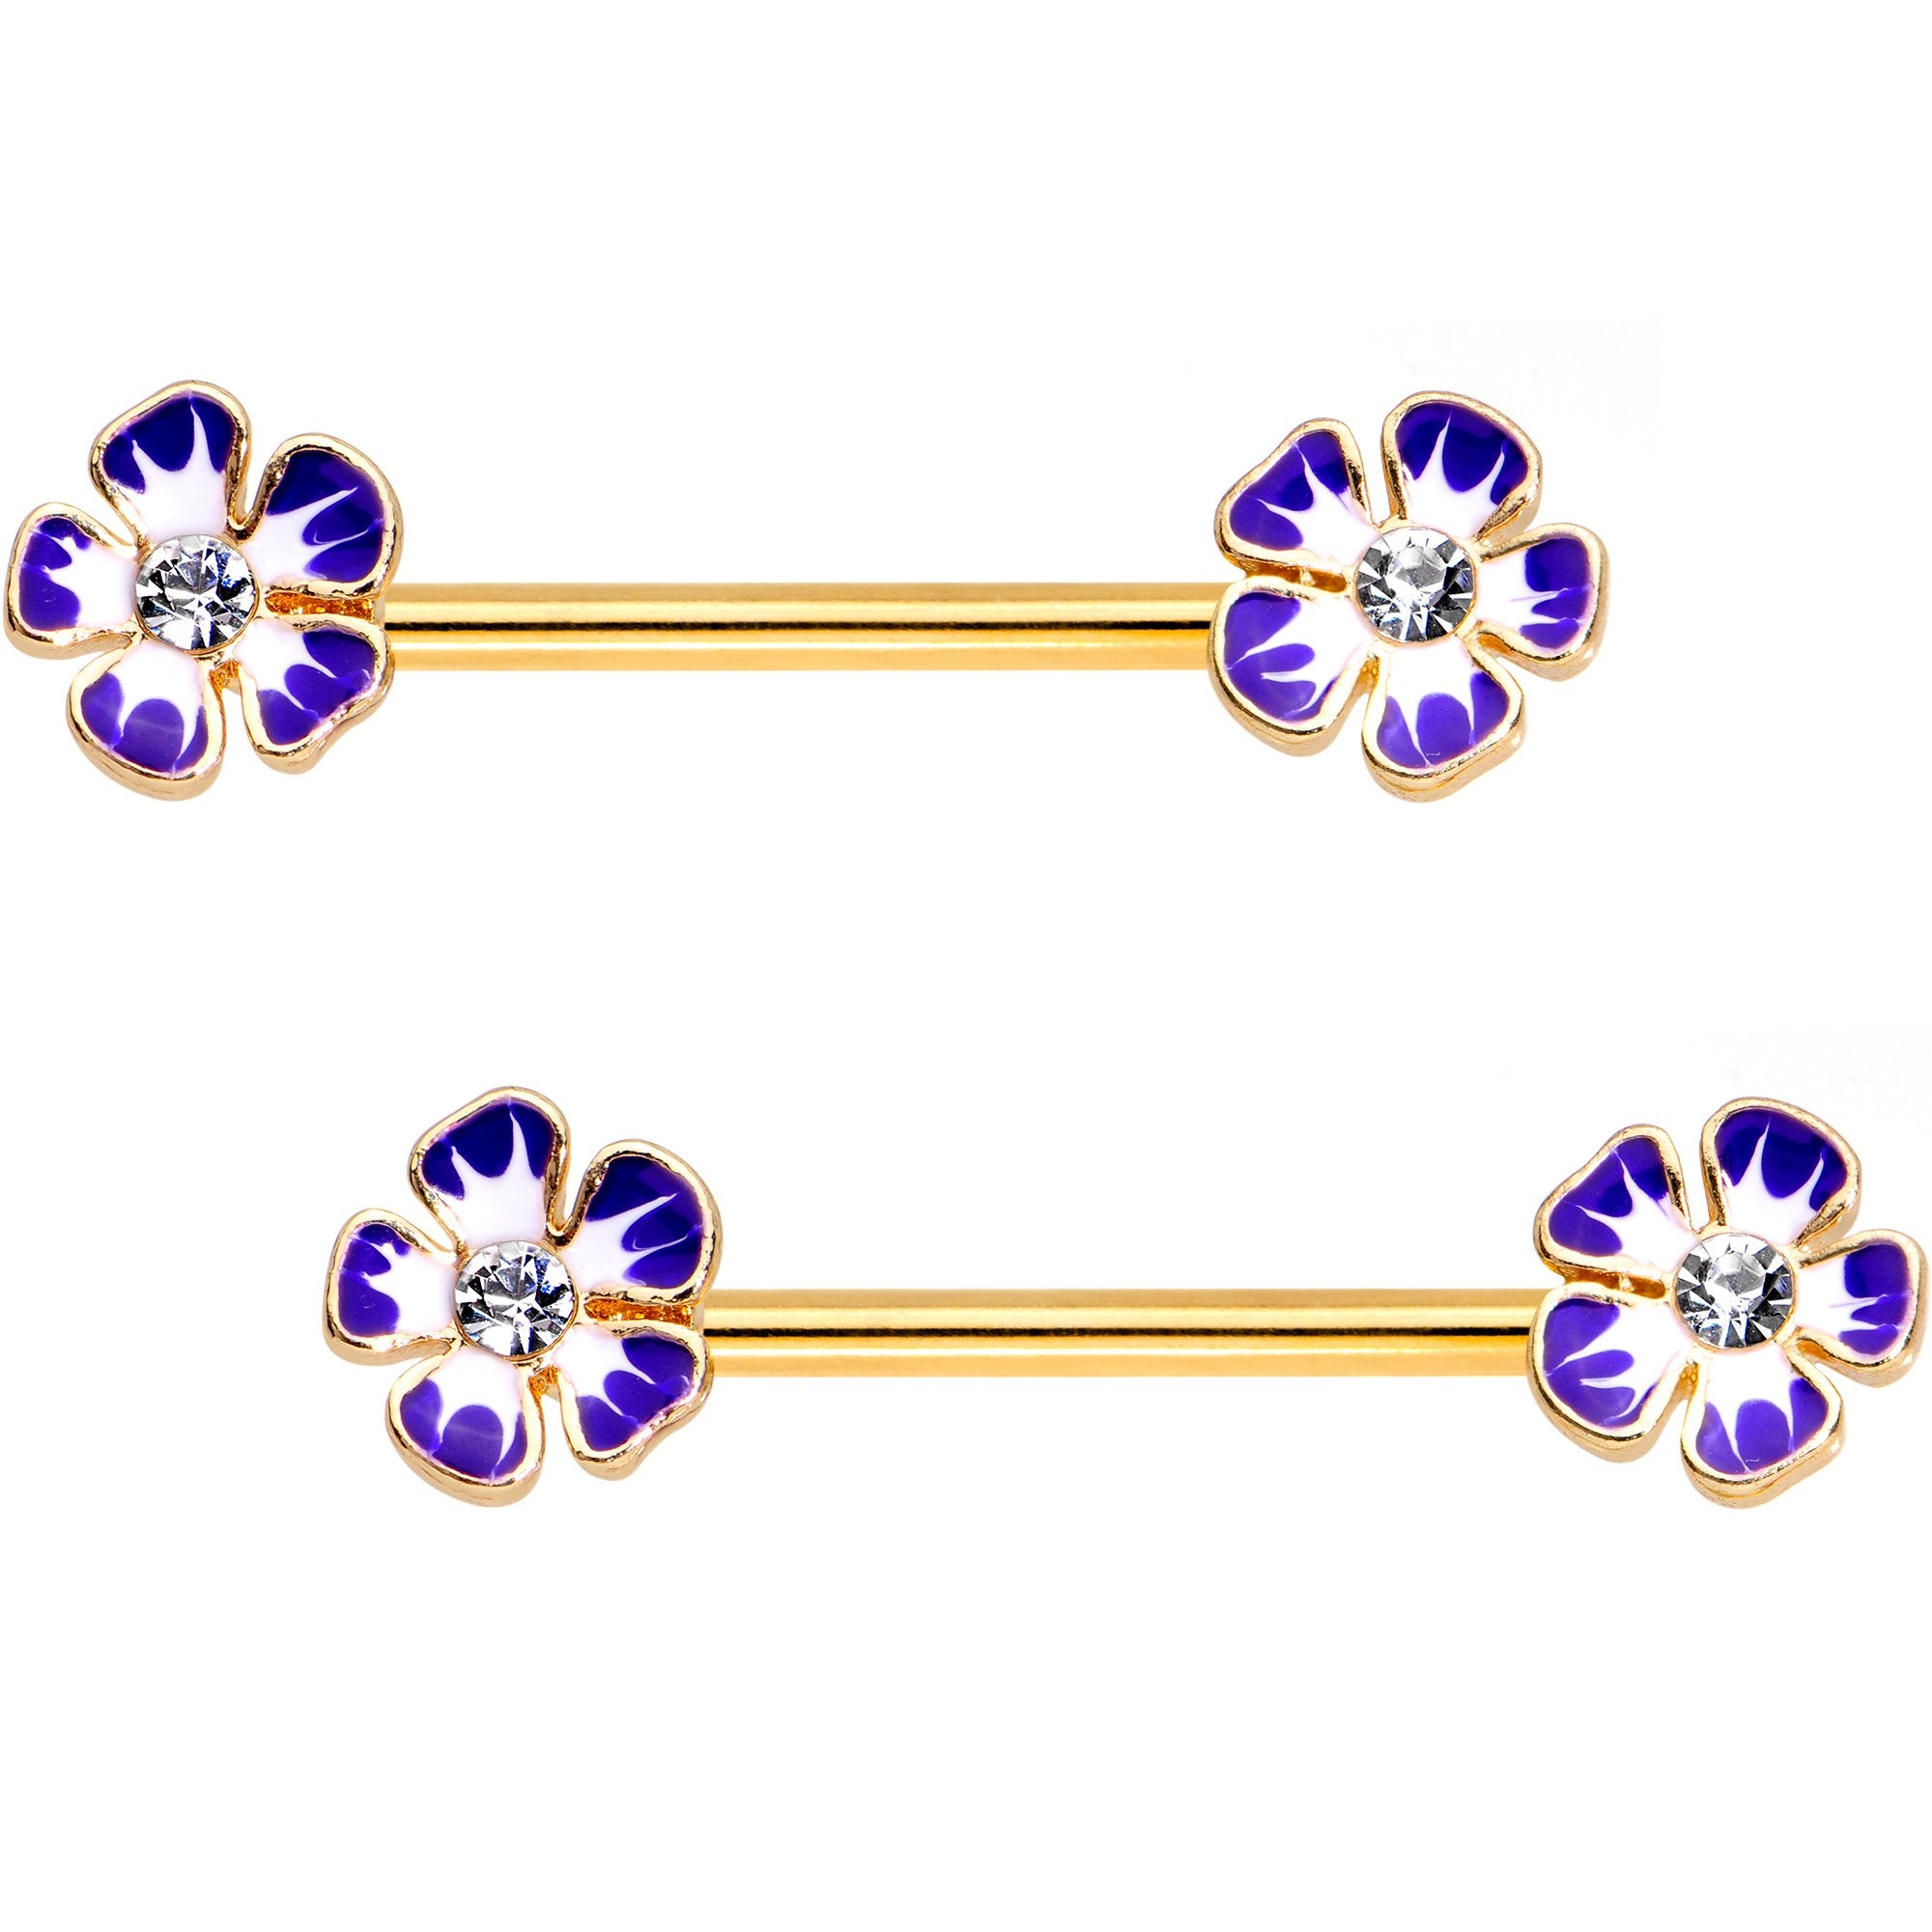 Clear Gem Gold PVD Morning Glory Flower Barbell Nipple Ring Set